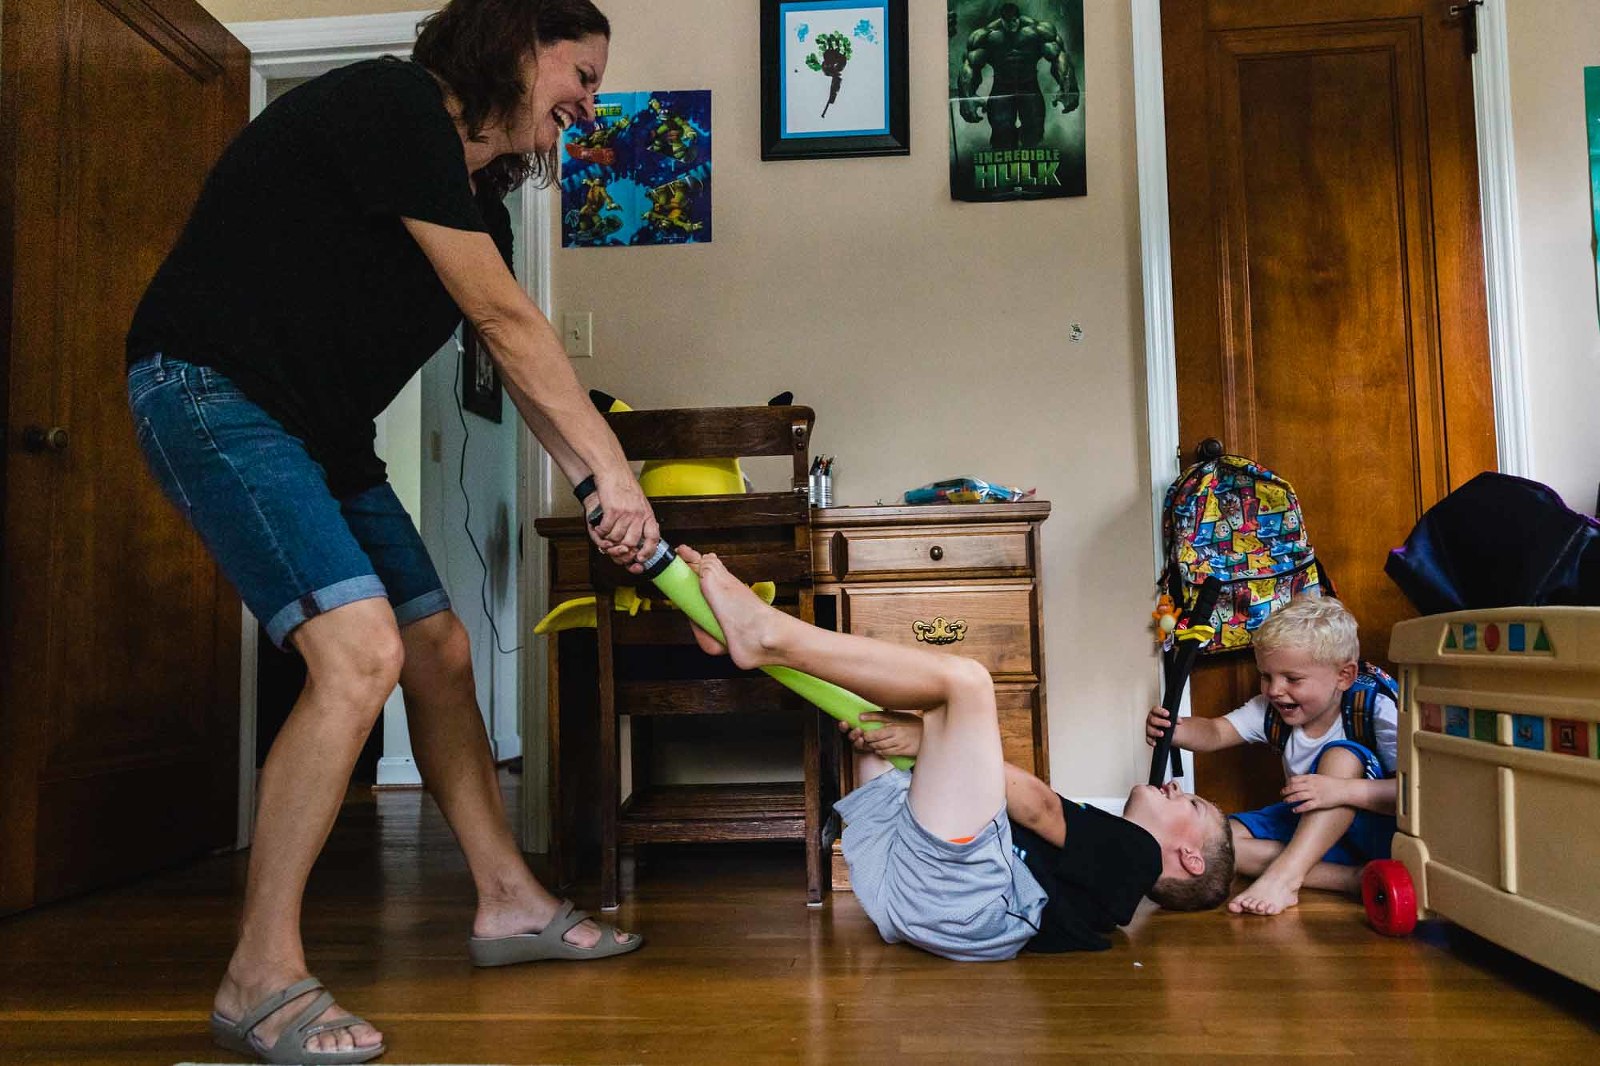 mom drags boys across the room by the feet, playing together and laughing